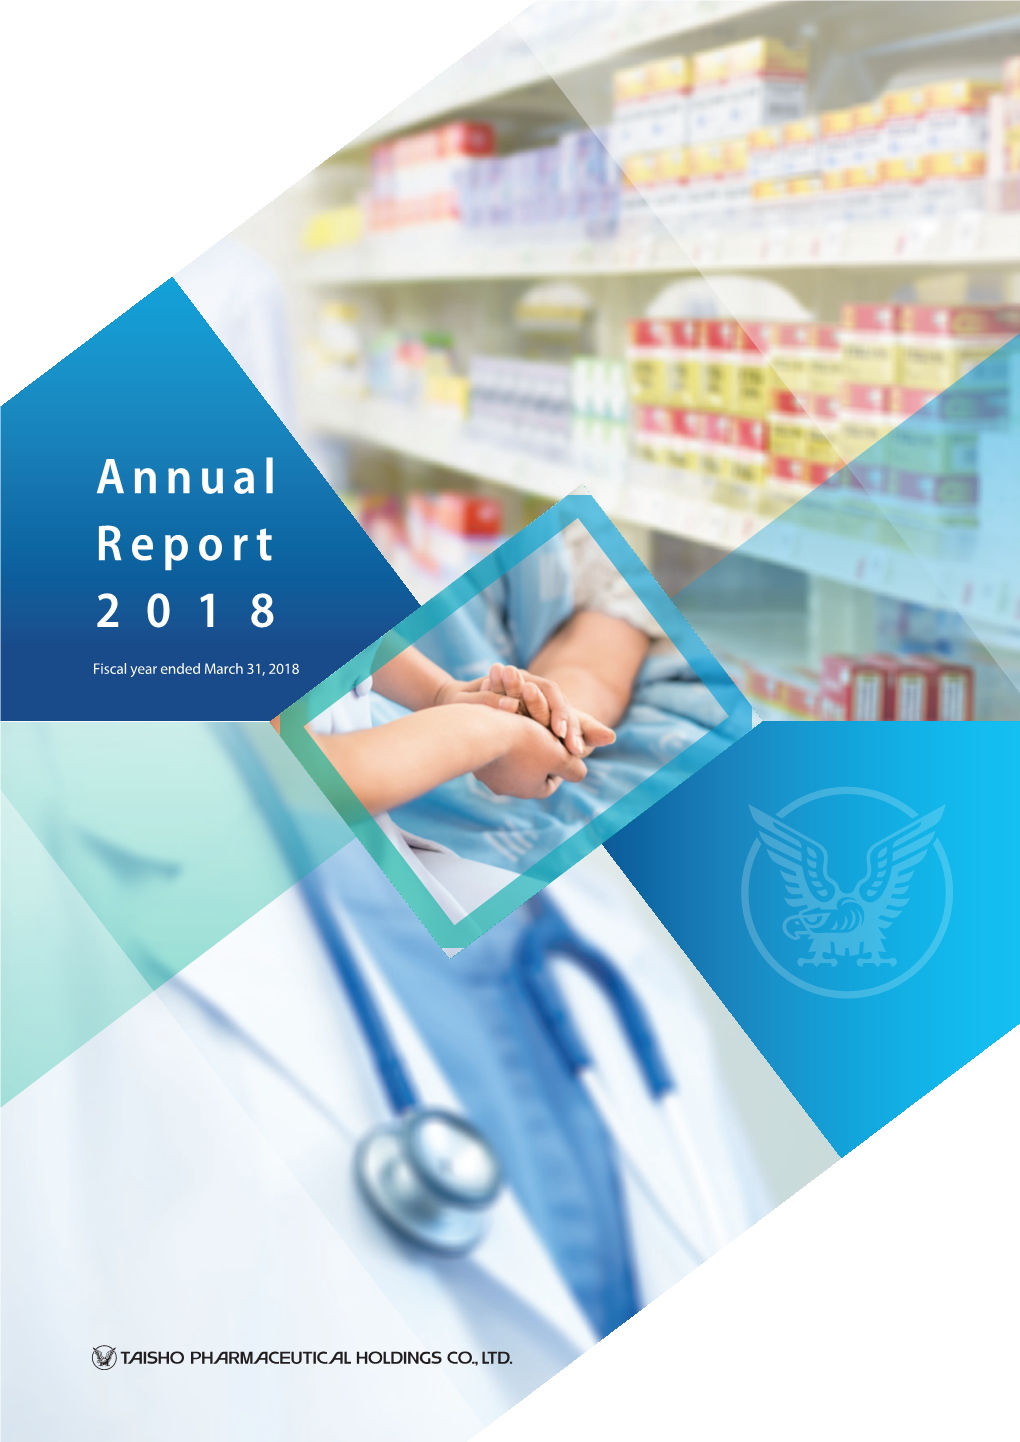 Annual Report 2018 1 History of the Taisho Pharmaceutical Group